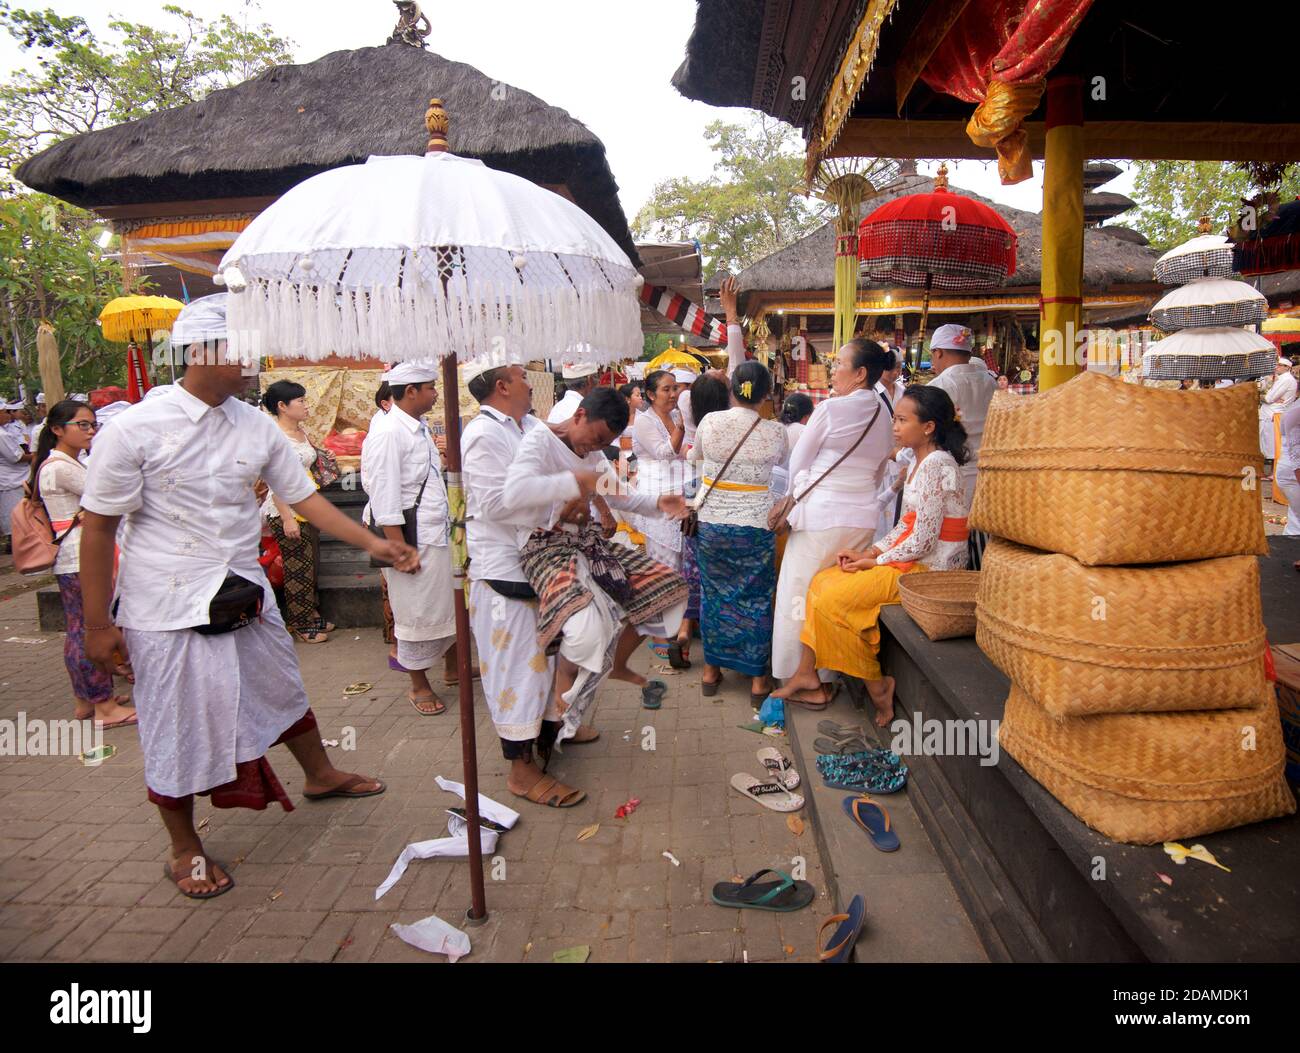 Balinese templegoers in festive attire at Sakenan temple, Bali, Indonesia..Some performers in the traditional dance events sucumb to a trance like state of possession after the dance performance and need exorcising. Stock Photo